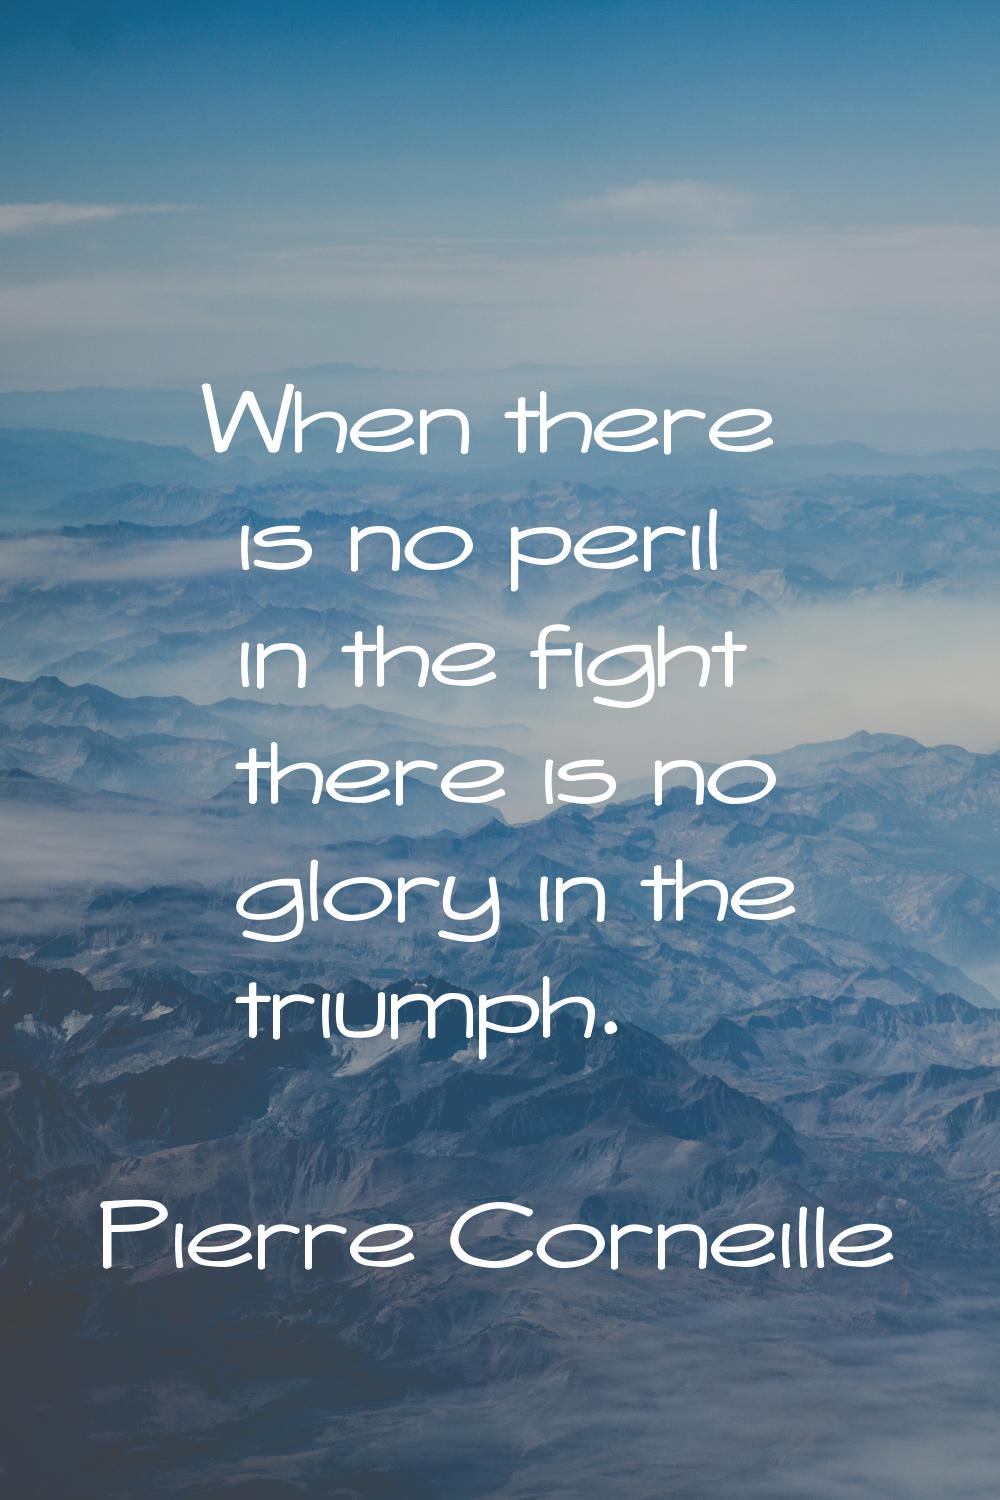 When there is no peril in the fight there is no glory in the triumph.